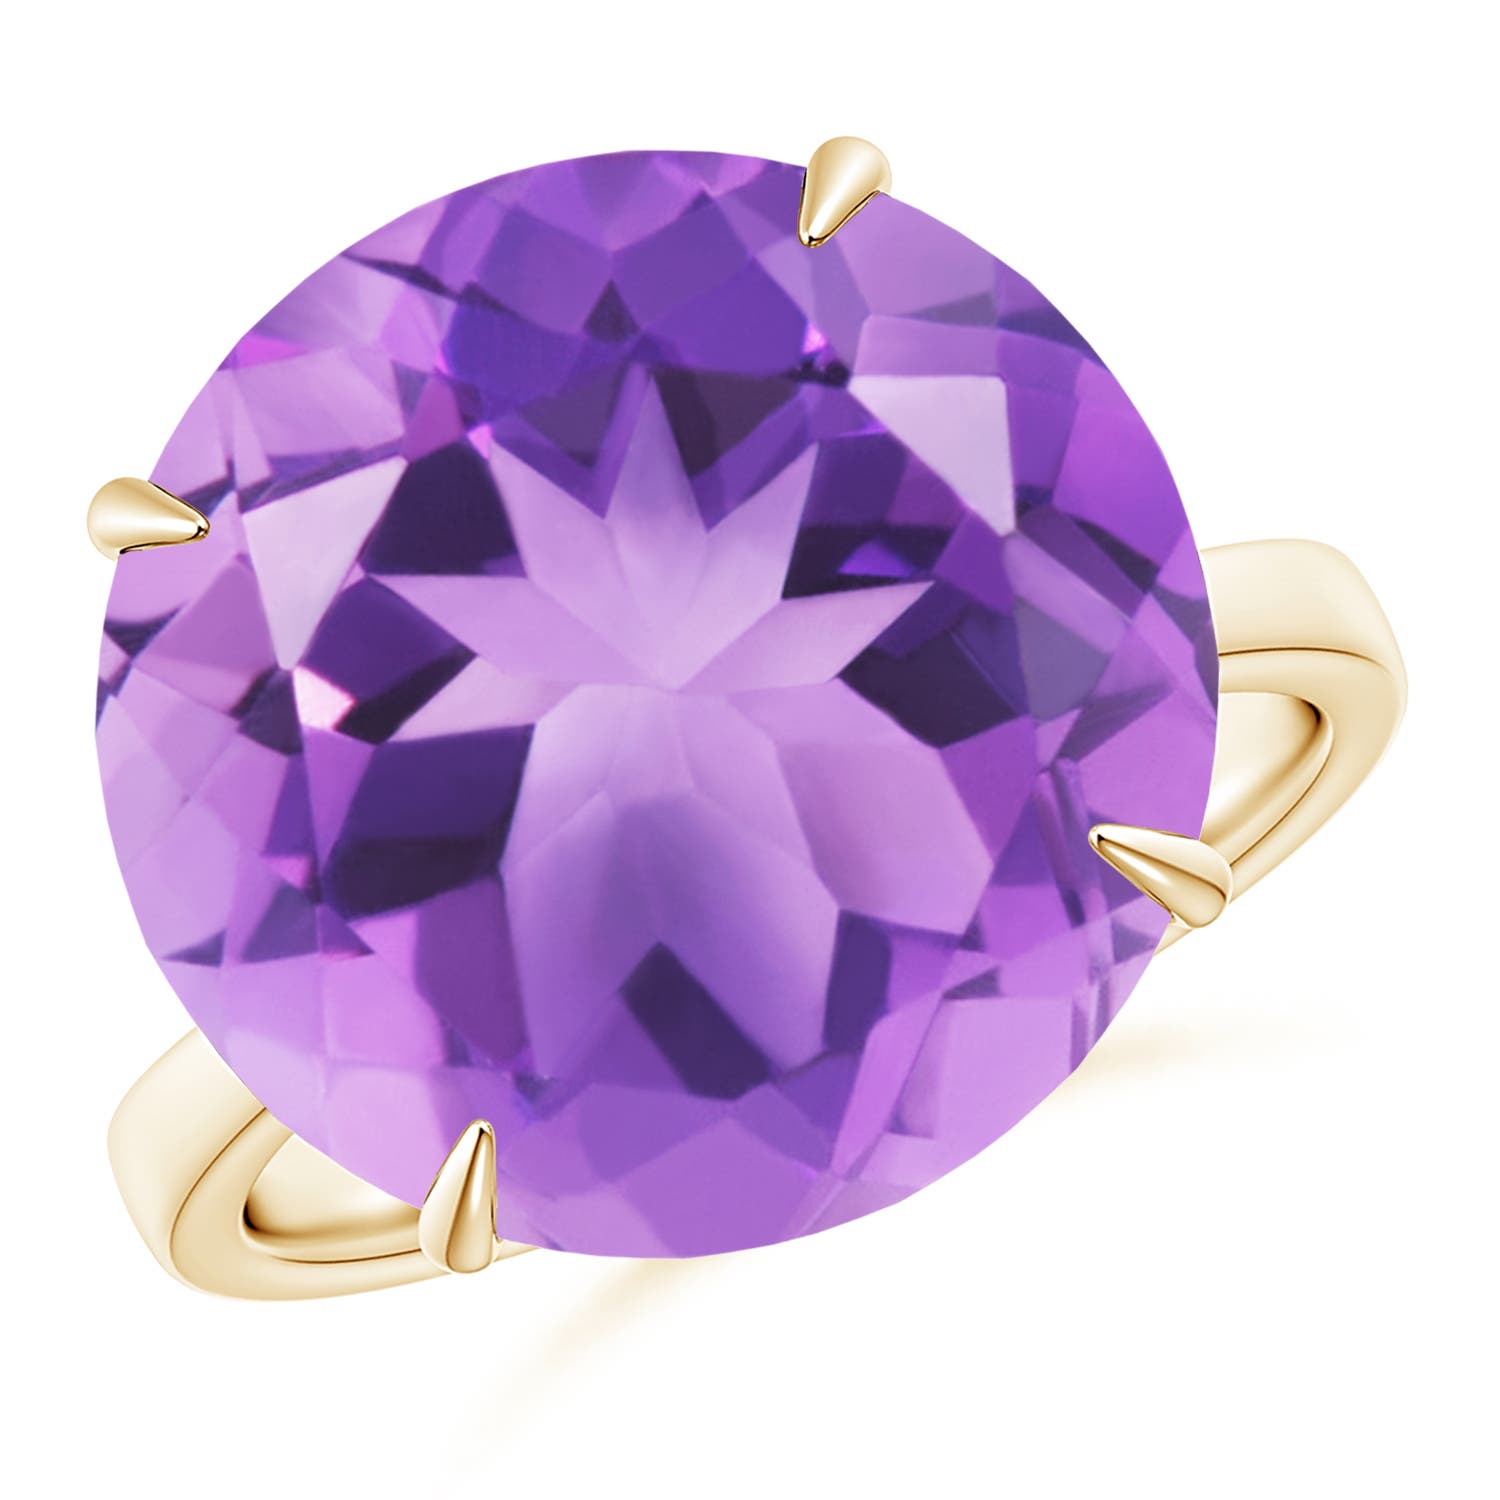 A - Amethyst / 11 CT / 14 KT Yellow Gold